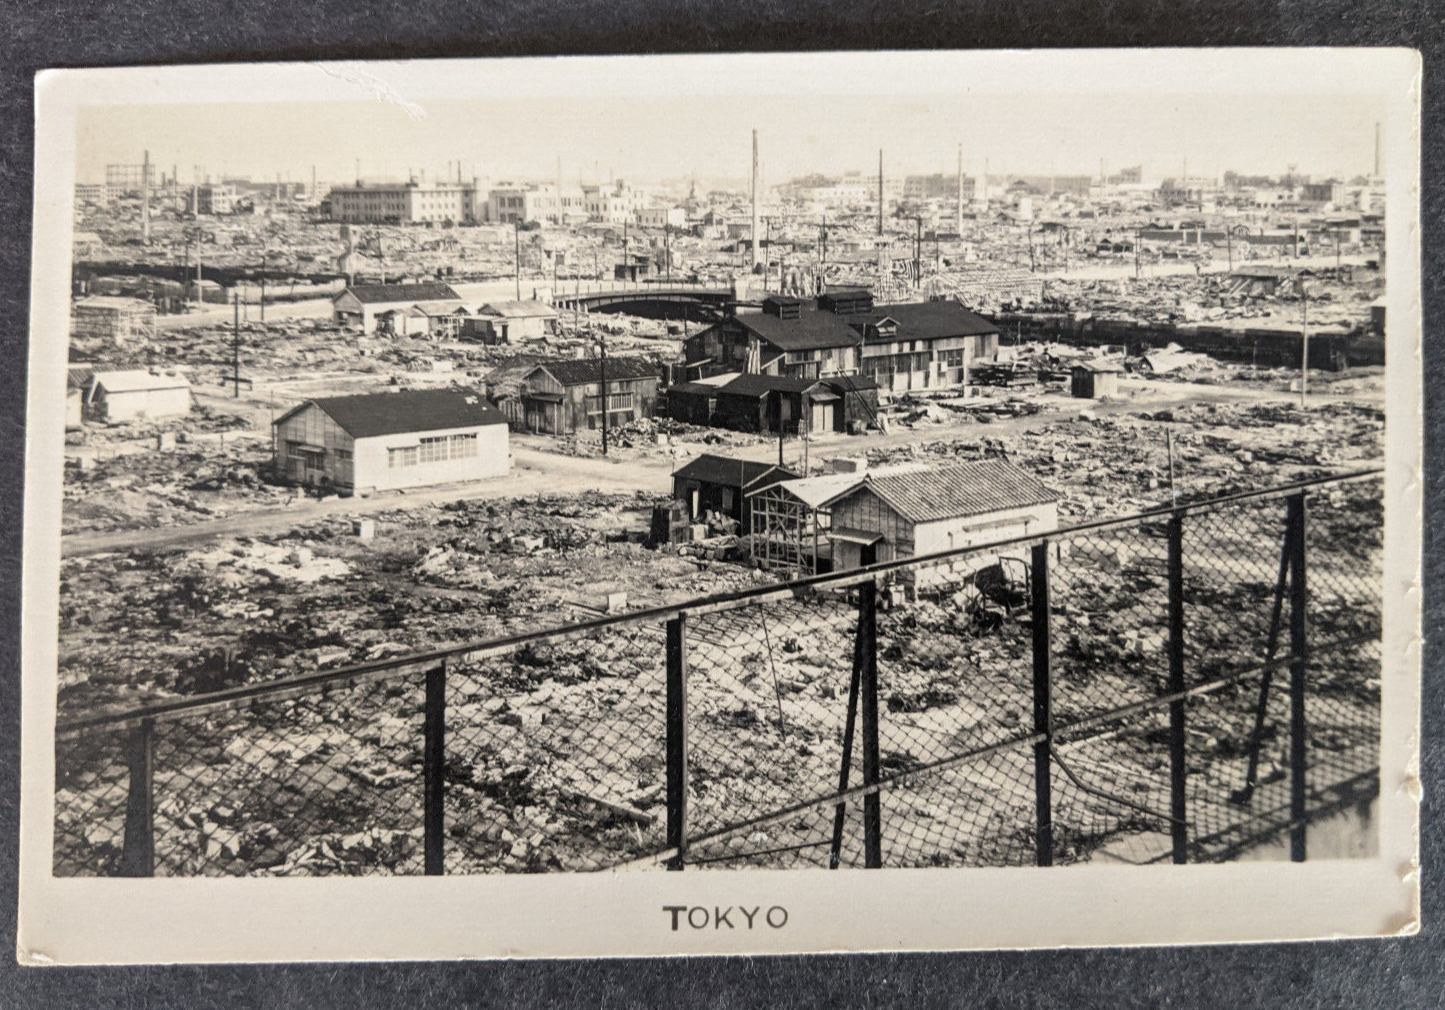 Vintage RPPC Photo of Tokyo Japan Devistation from an Earthquake, War?